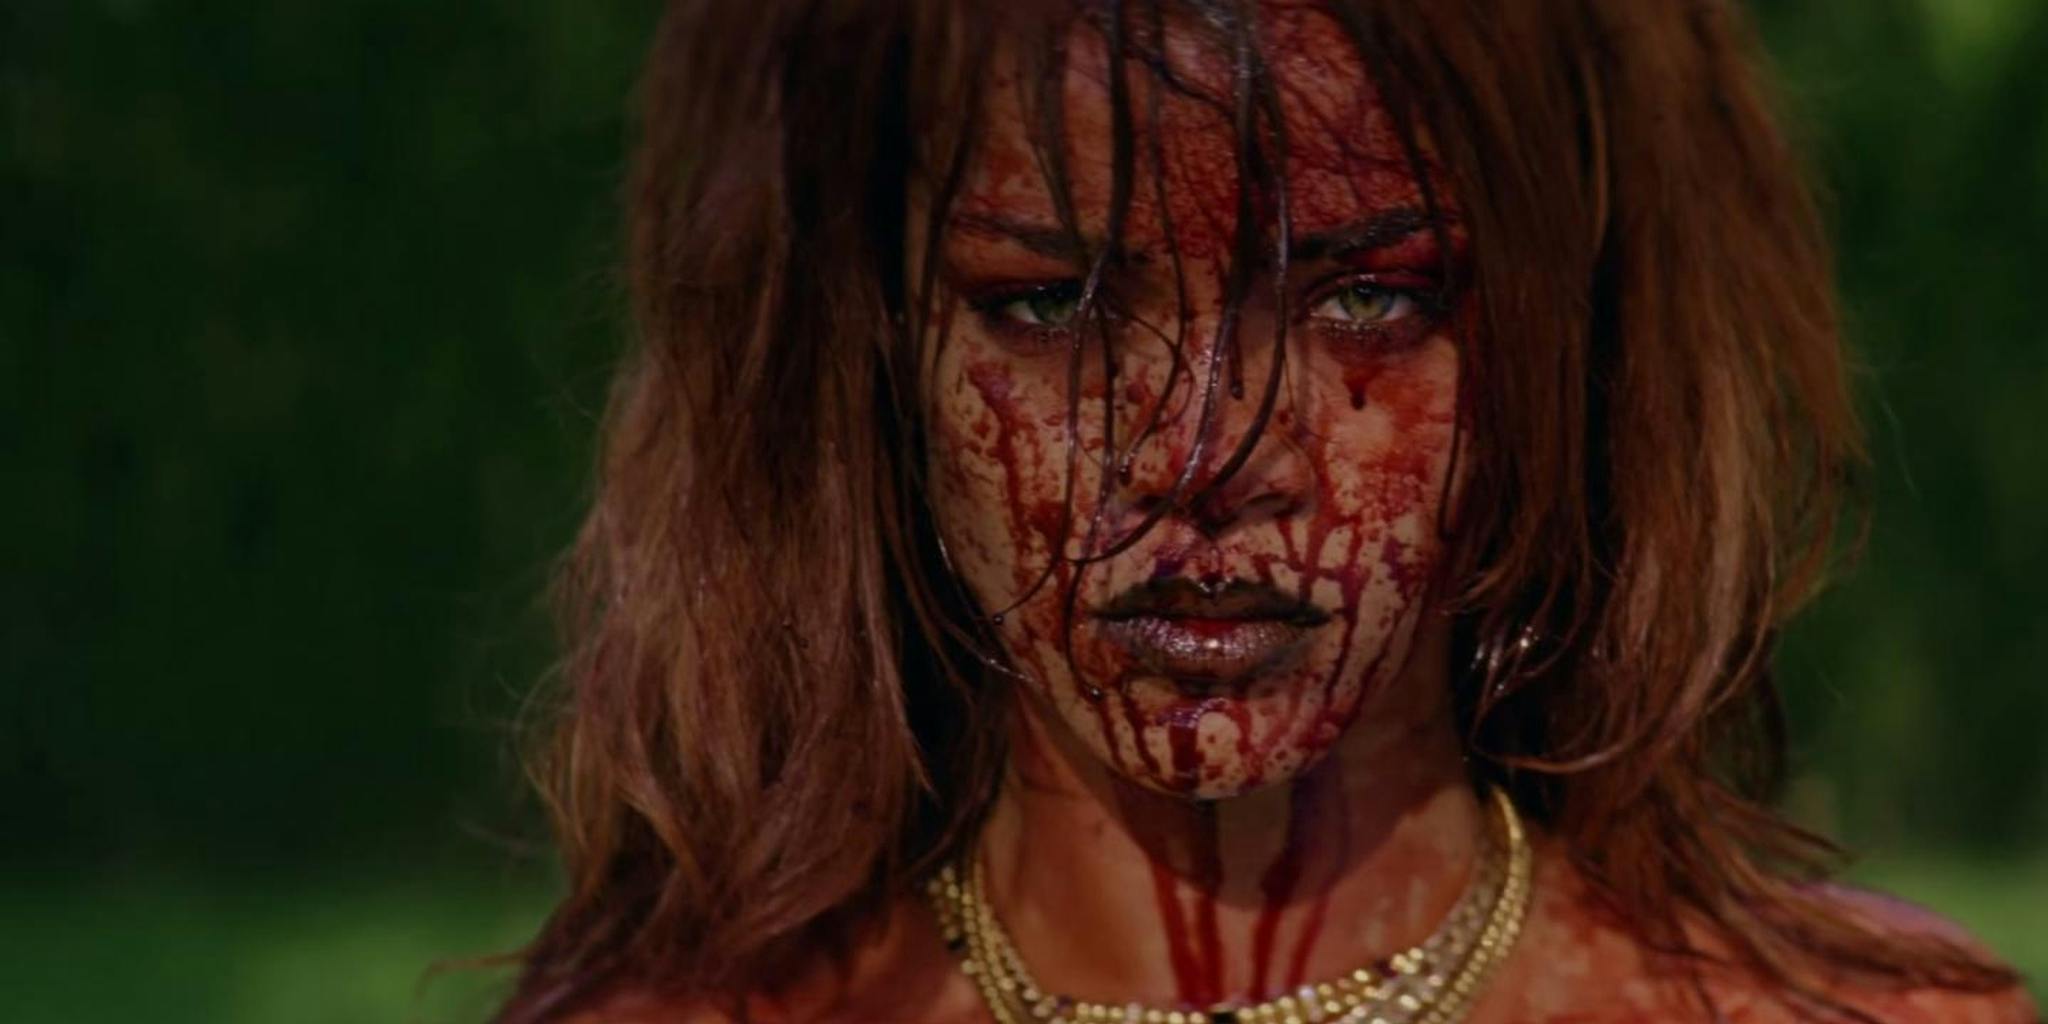 Blood-soaked Rihanna lounges naked on a pile of money in this new video